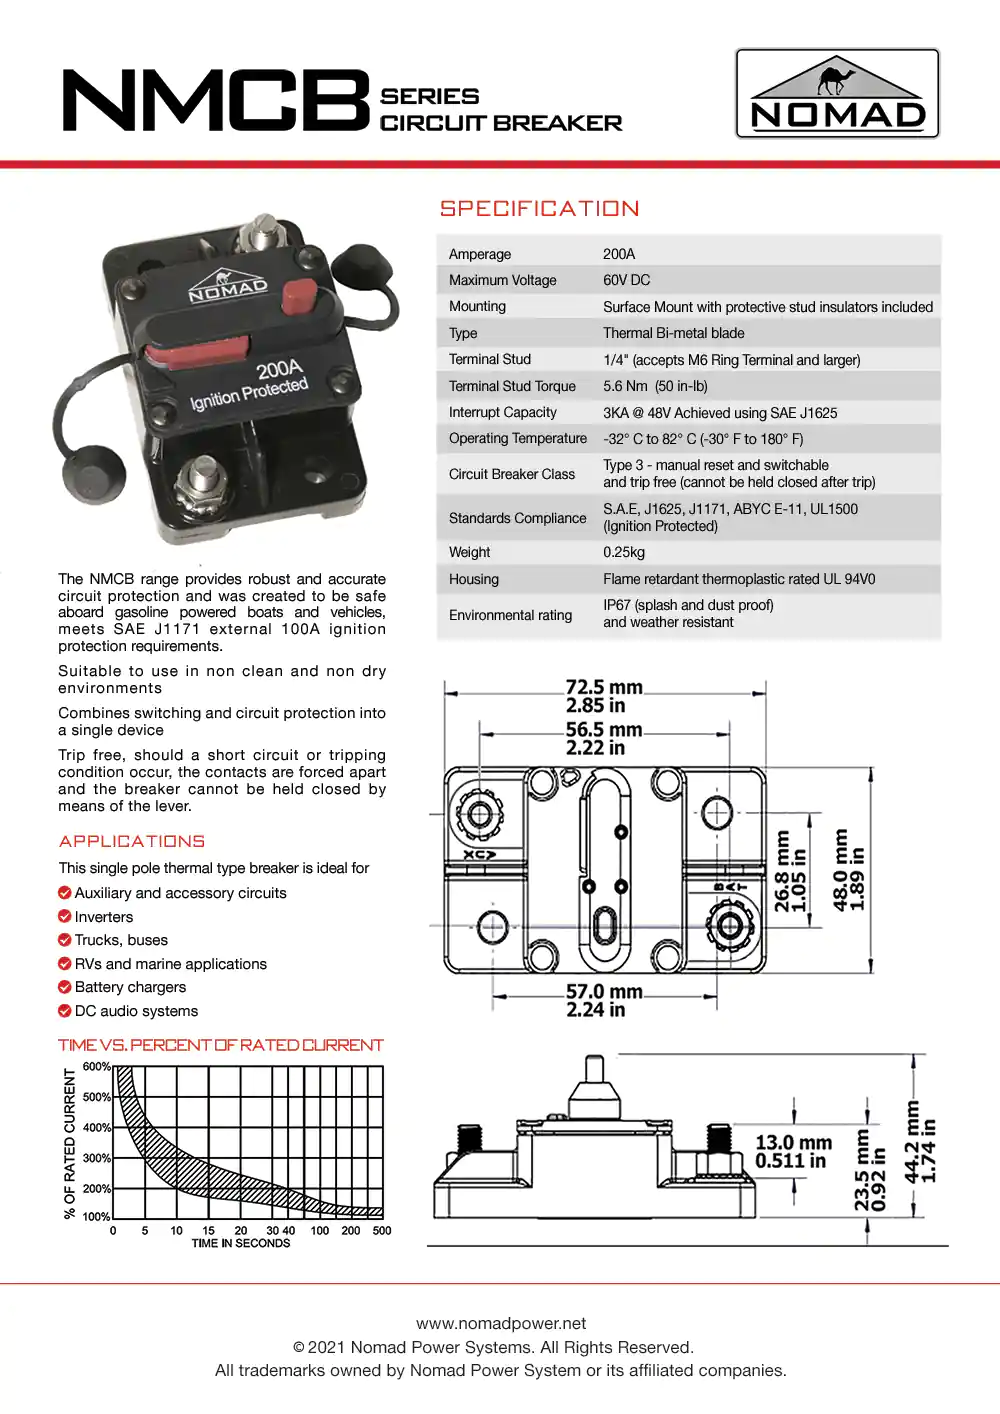 NOMAD 200A DC CIRCUIT BREAKER NMCB SPECIFICATION SHEET